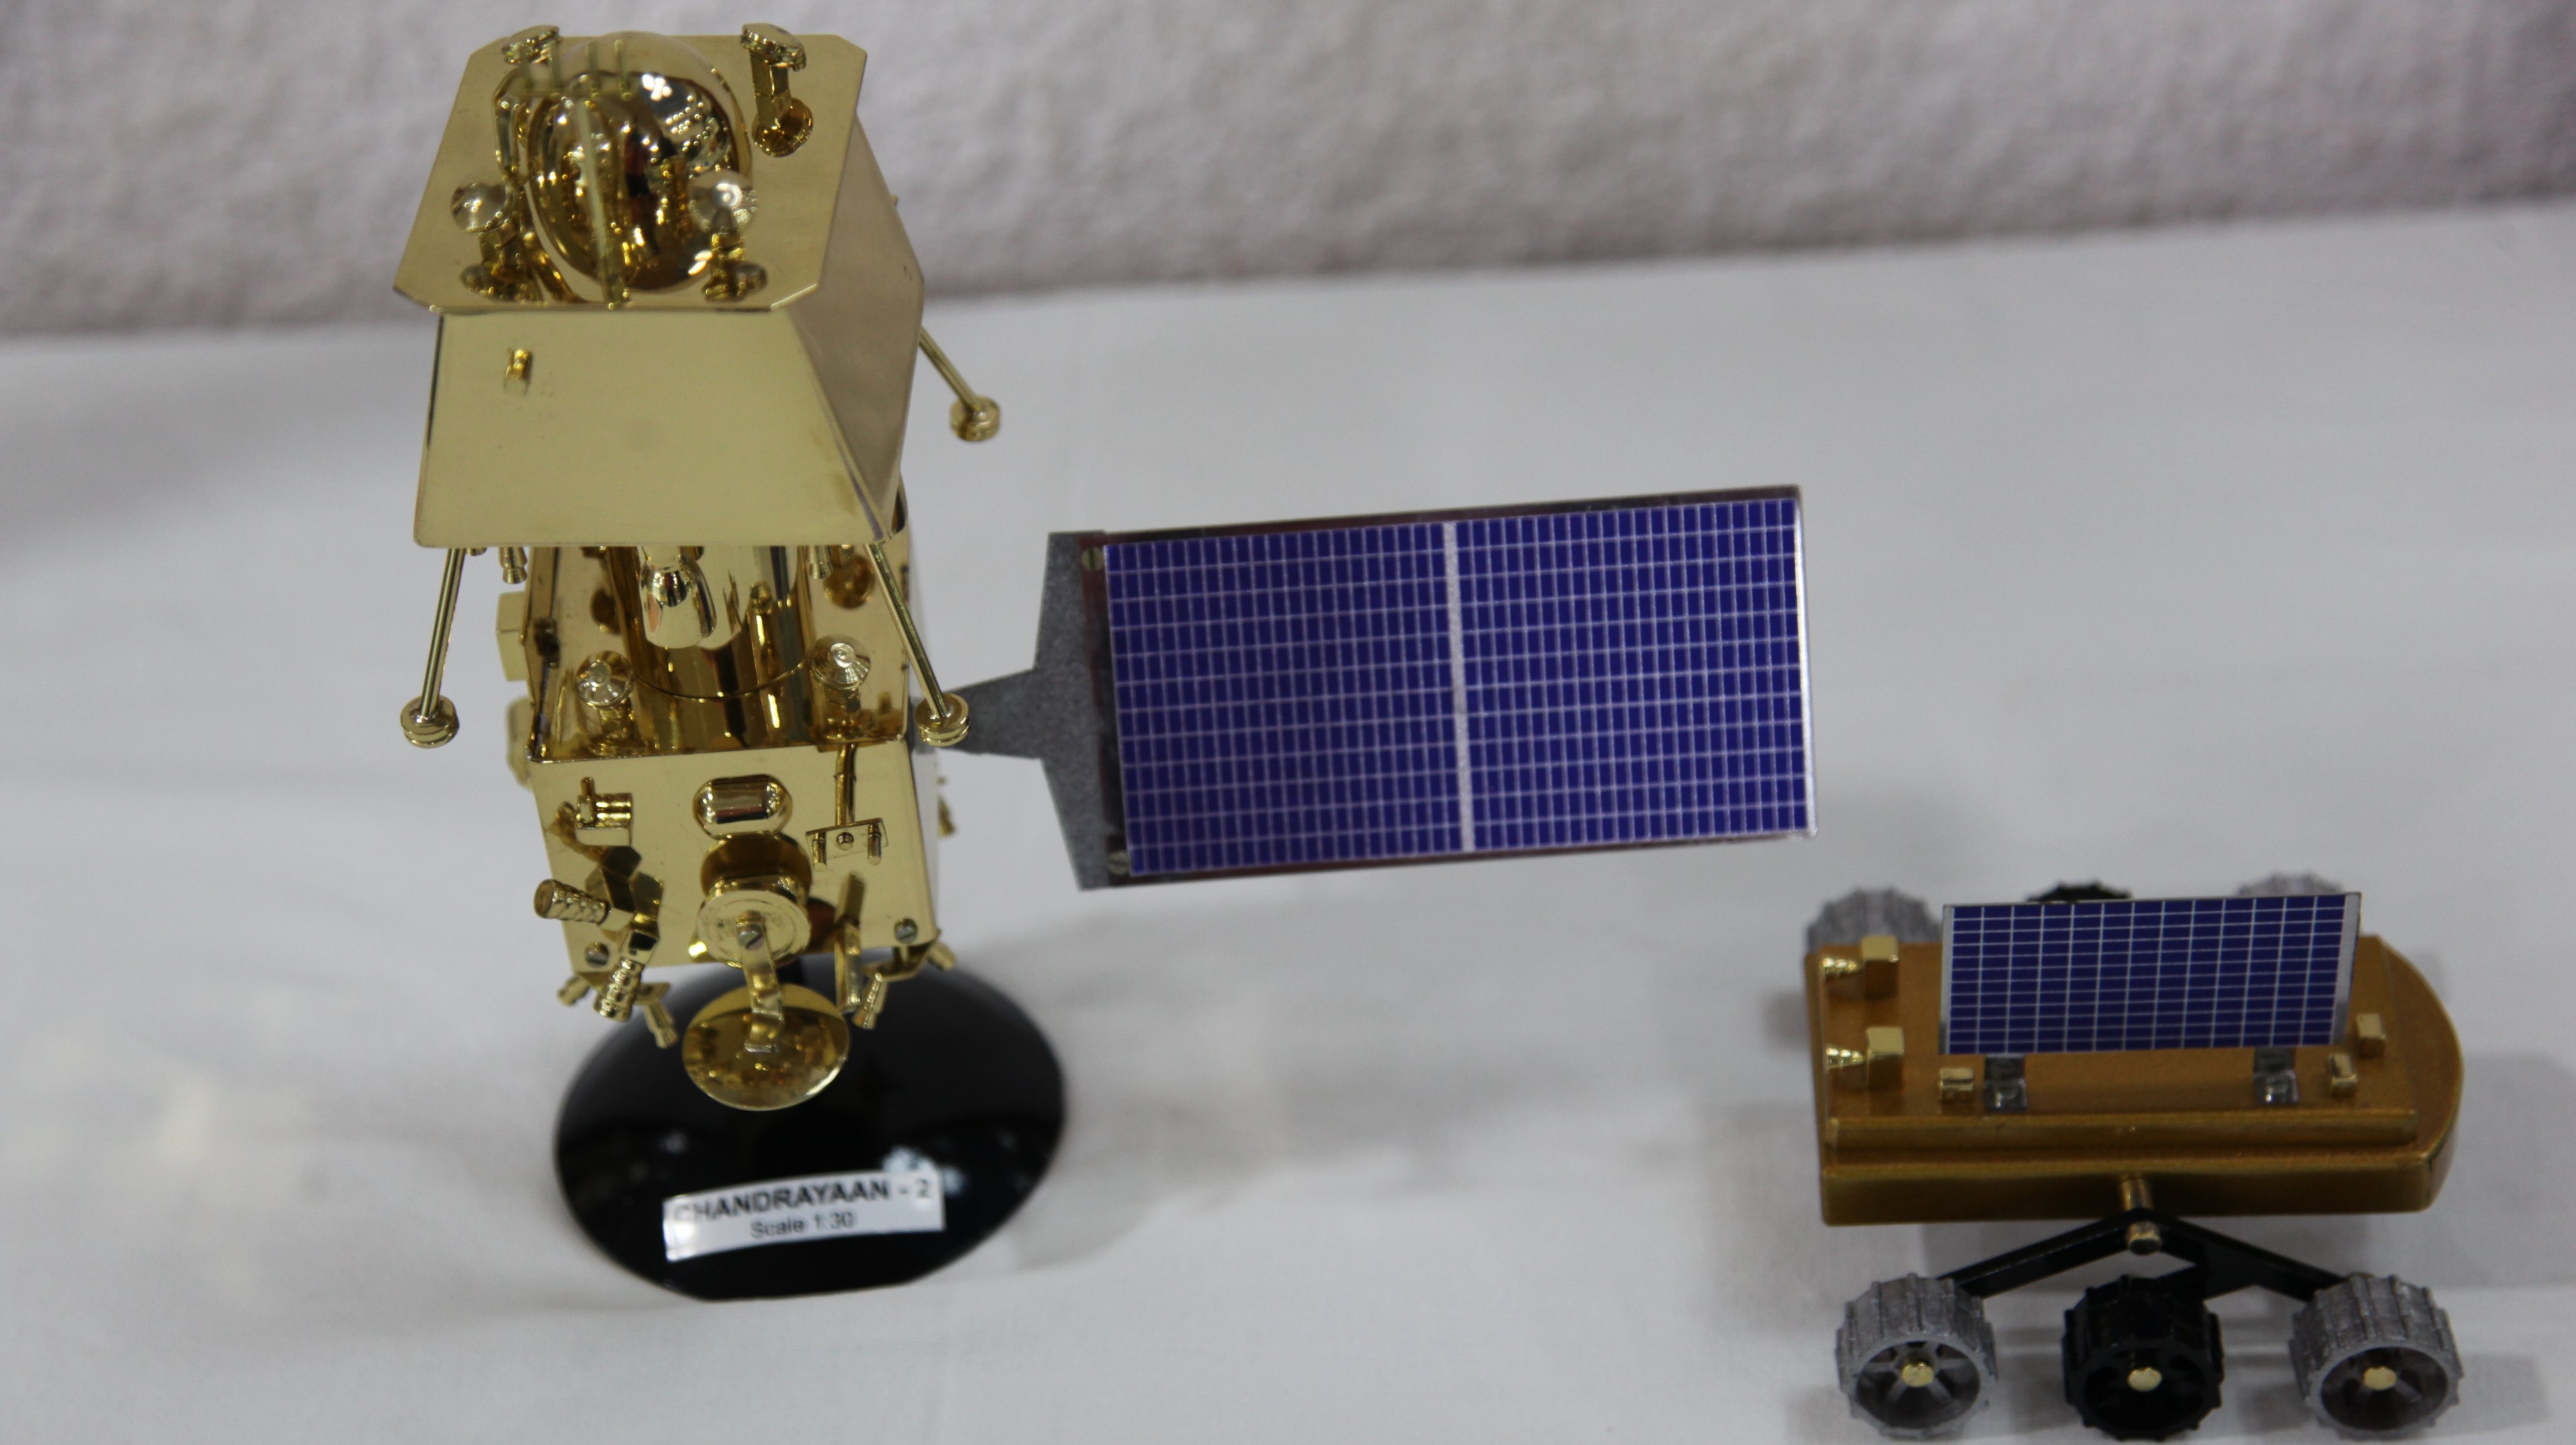 Scale models of the Indian moon shot on display at the head quarters of the Indian Space Research Organisation (ISRO).